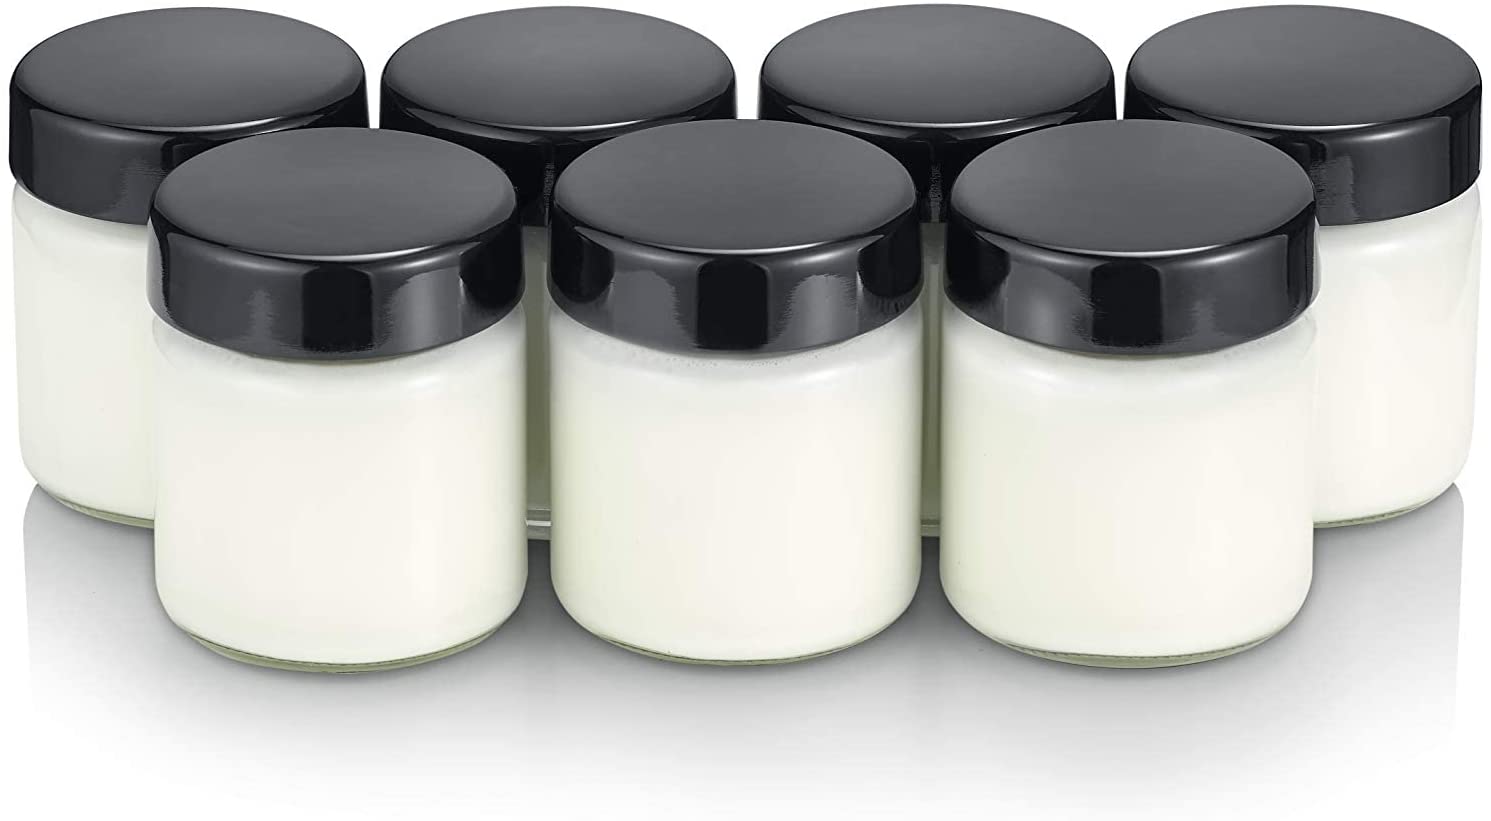 SEVERIN Replacement jars for yoghurt makers, yoghurt glasses with lids (7 x 150 ml), suitable for the Severin yoghurt machines JG 3516 / JG 3518 / JG3519 / JG 3520 / JG 3521 and JG 3525, black, EG 3514